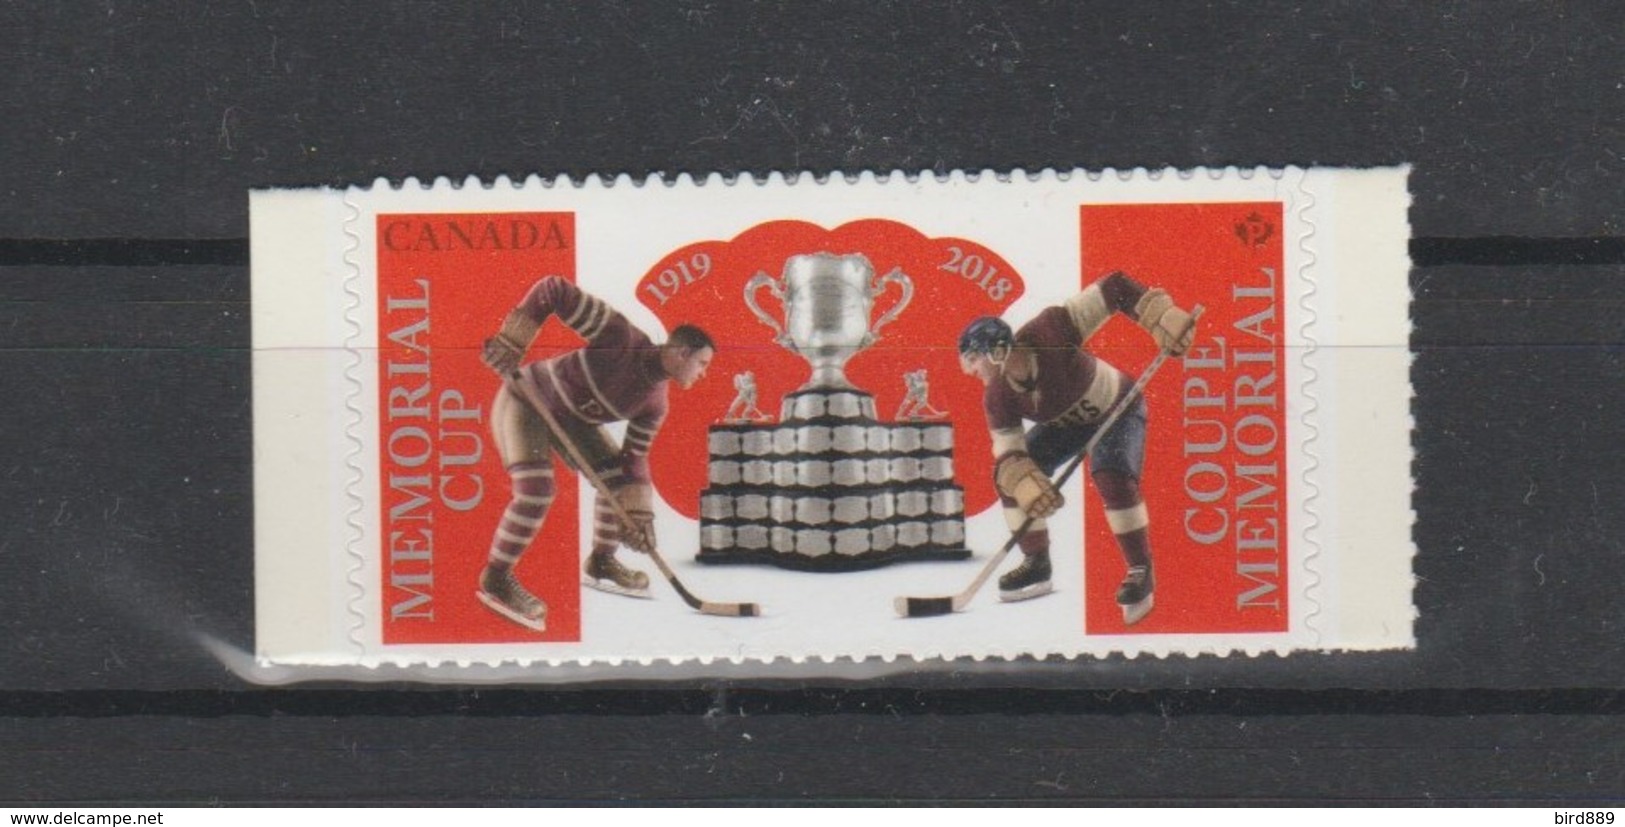 2018 Canada Memorial Cup Hockey Single Stamp From Booklet MNH - Timbres Seuls